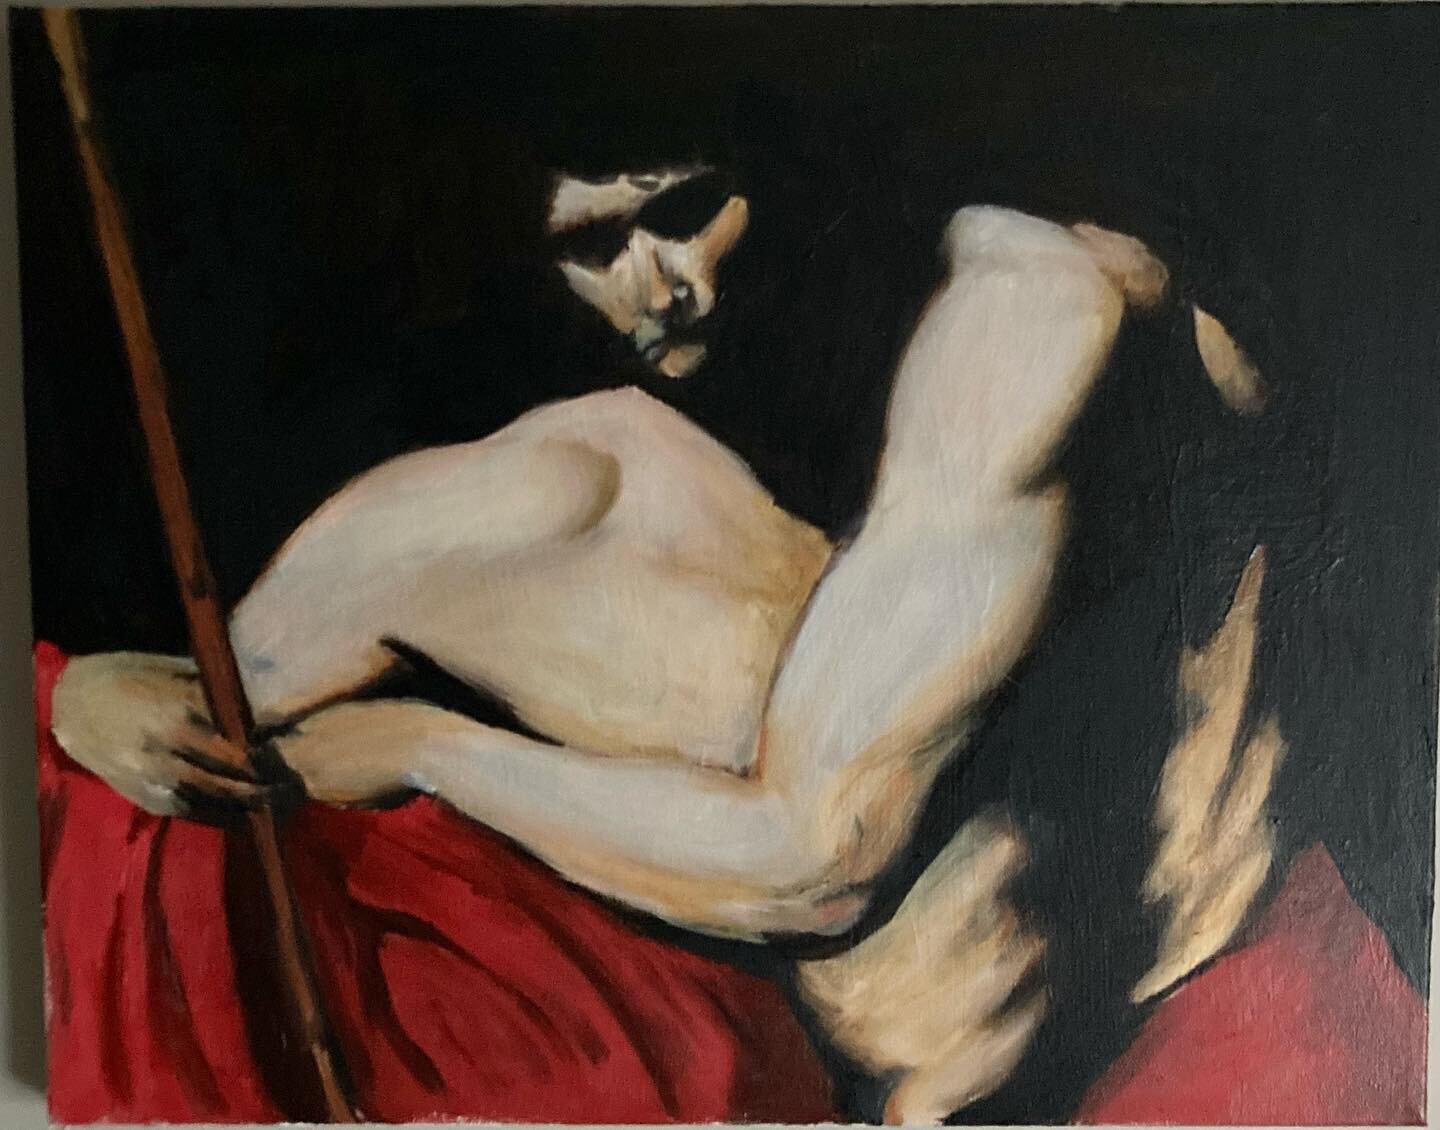 Study of Caravaggio&rsquo;s St John the Baptist with distorted proportions
Second slide is the original